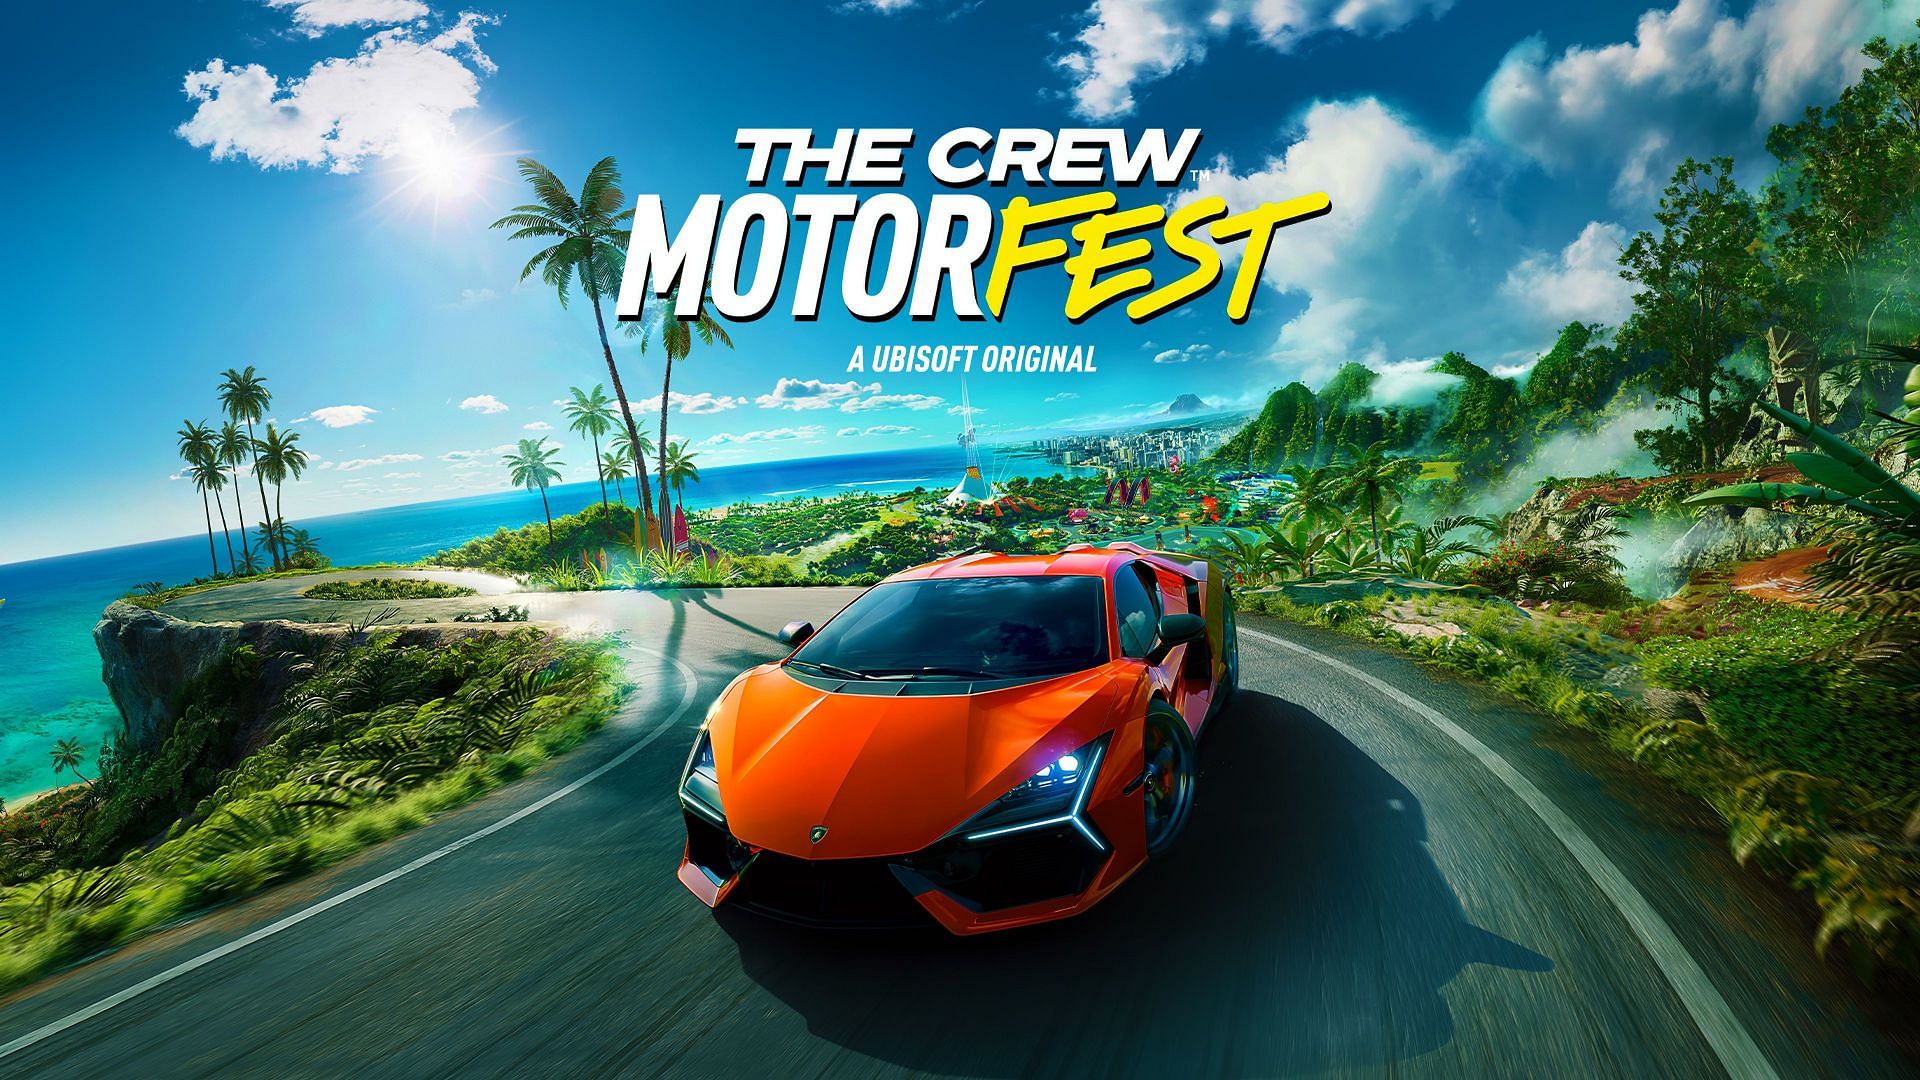 How to use The Crew Motorfest photo mode